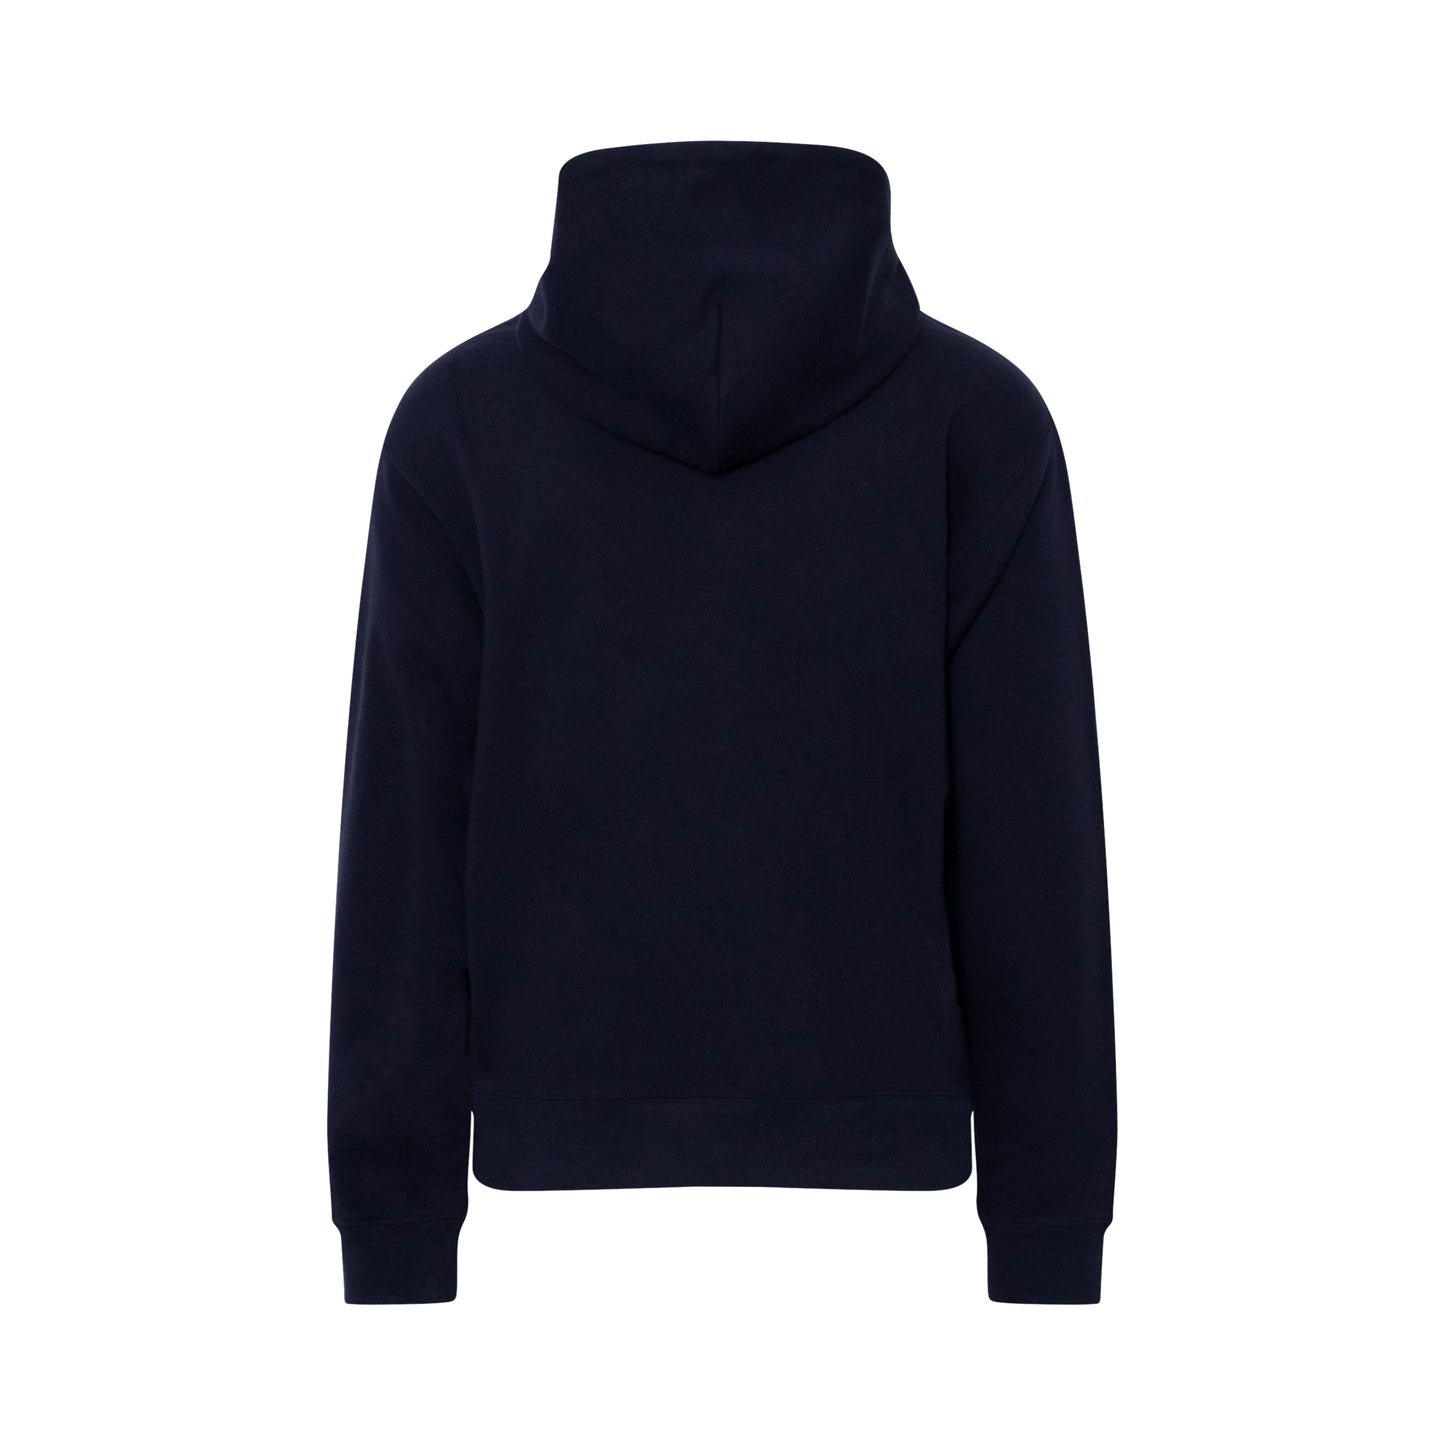 Classic Tiger Hoodie in Navy Blue